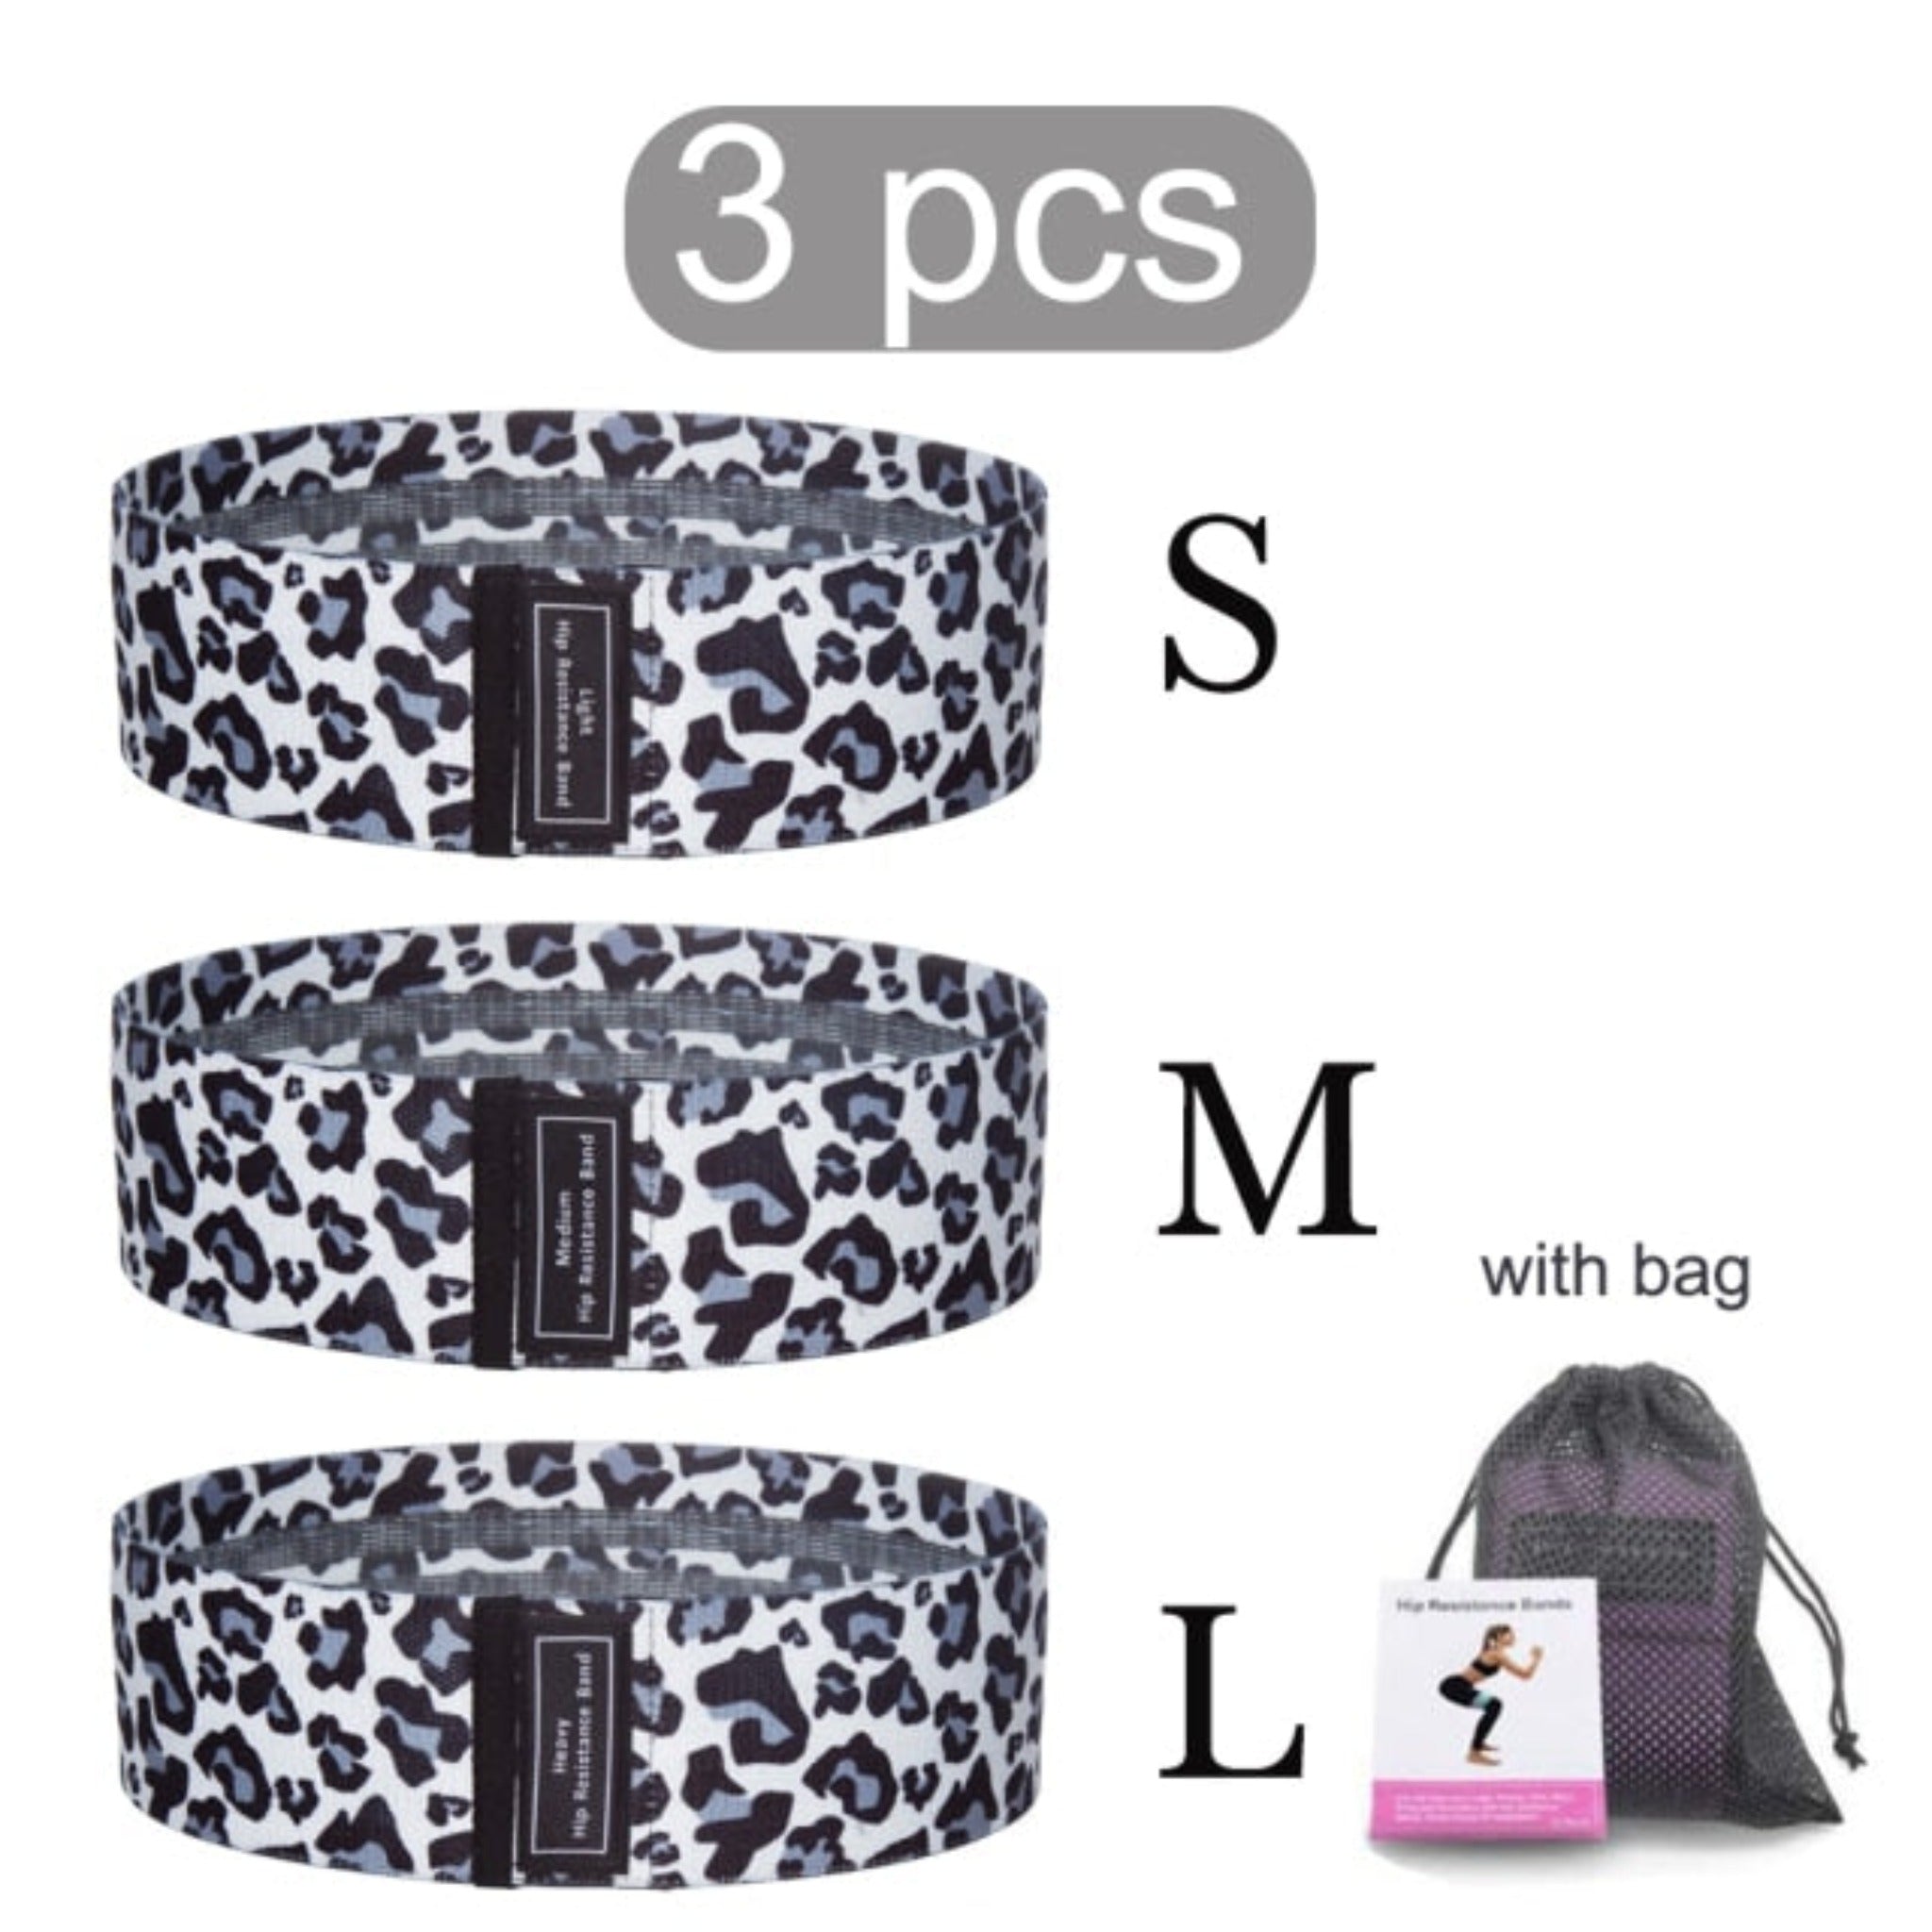 3 pcs booty bands resistance bands with bag and white background